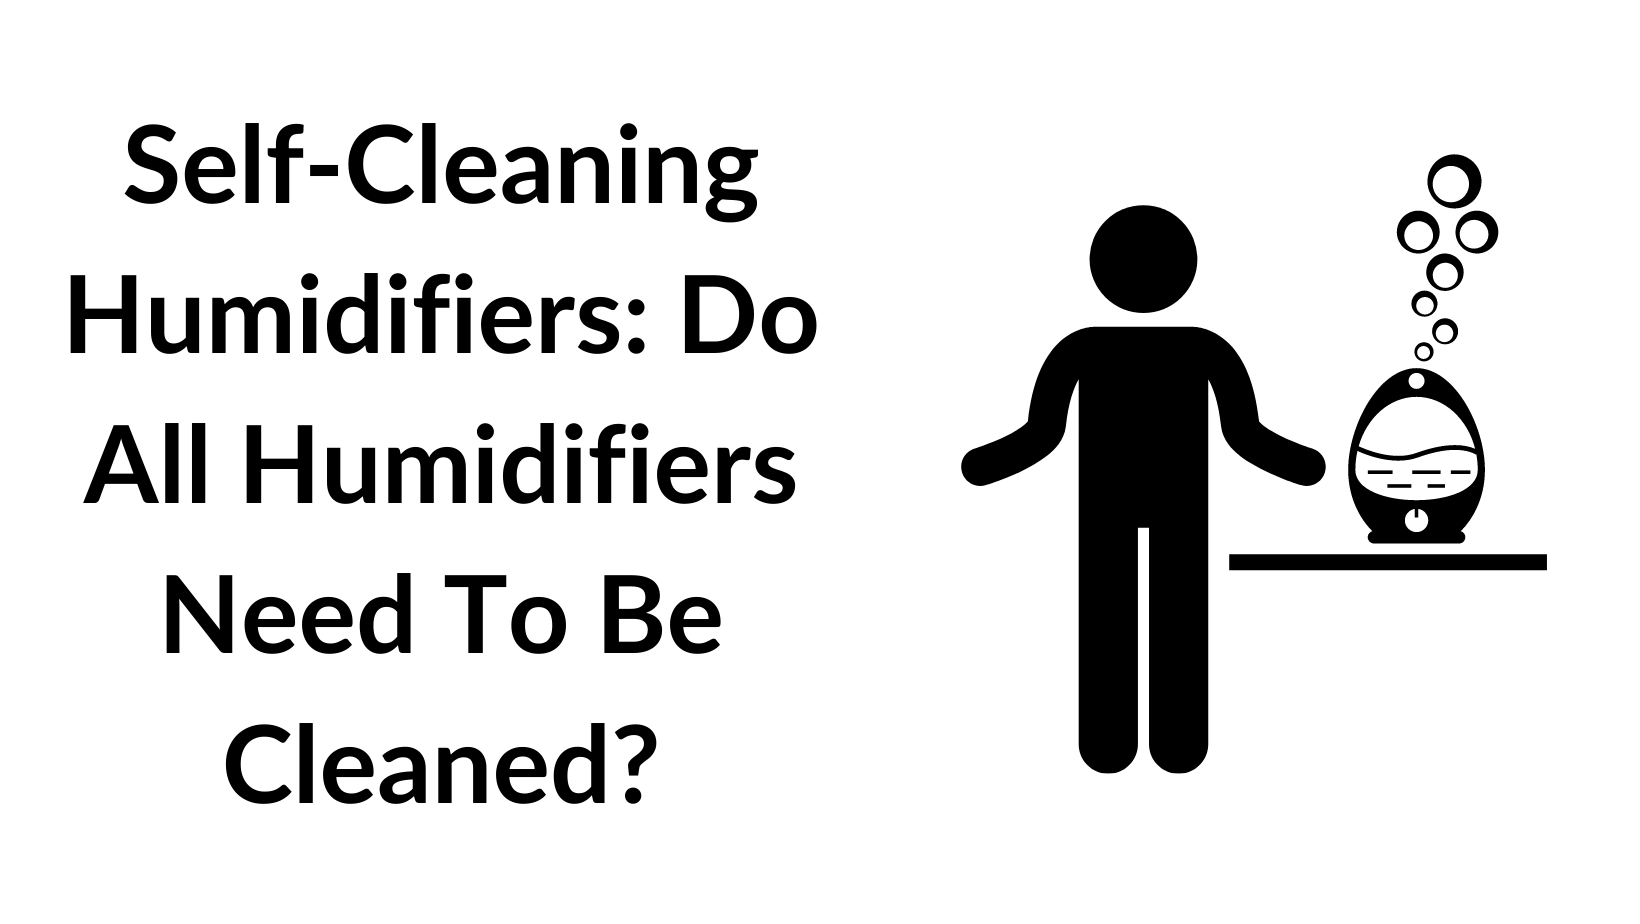 Self-Cleaning Humidifiers